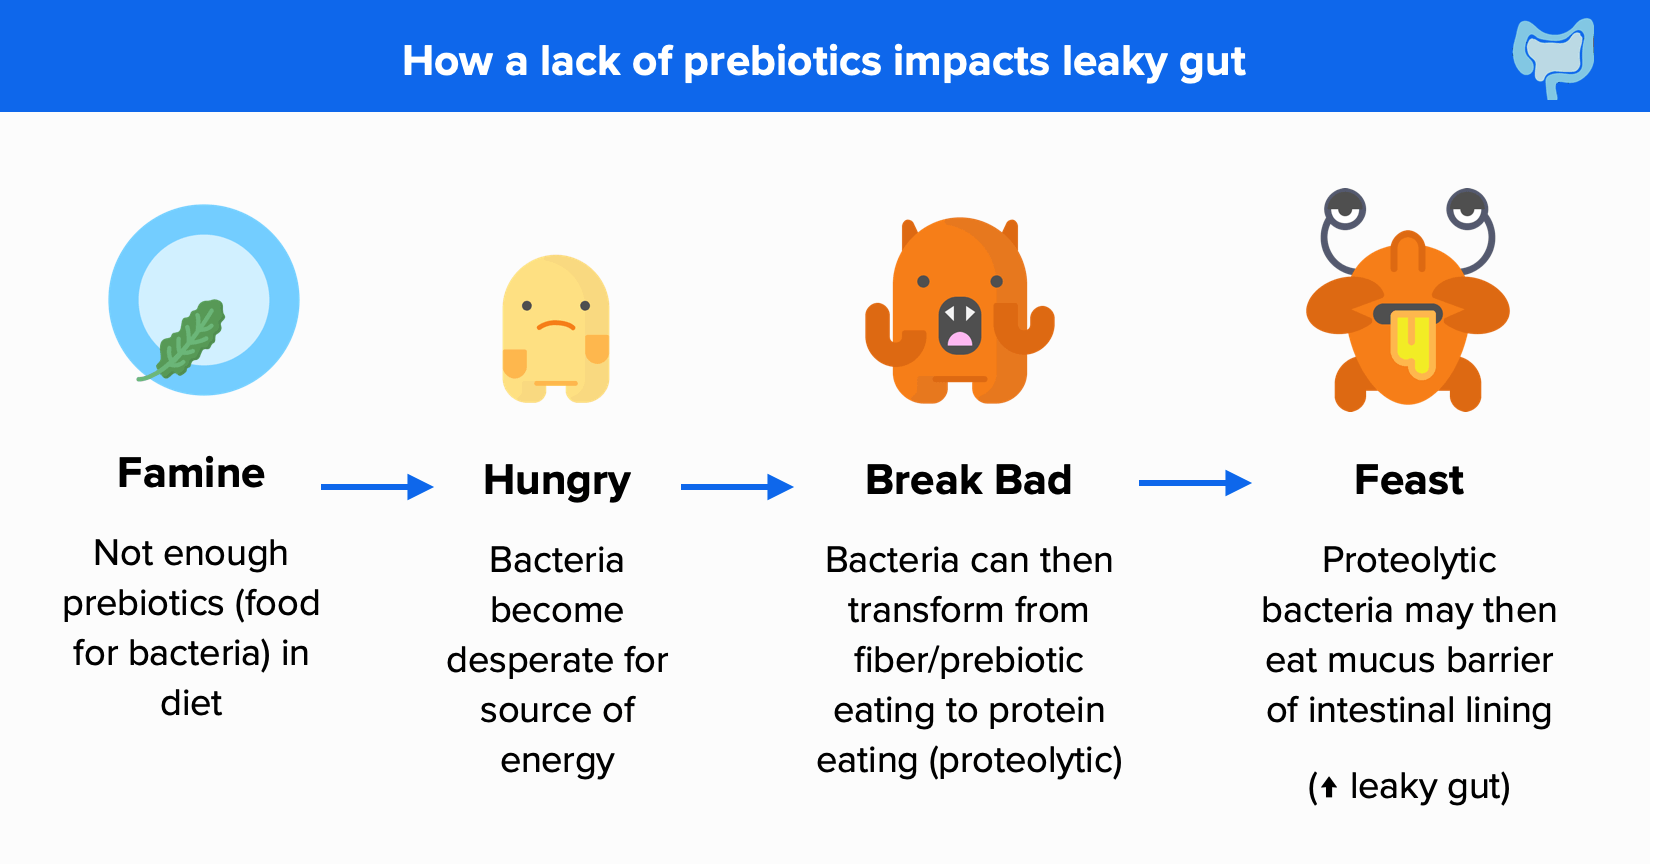 How a lack of prebiotics impacts leaky gut